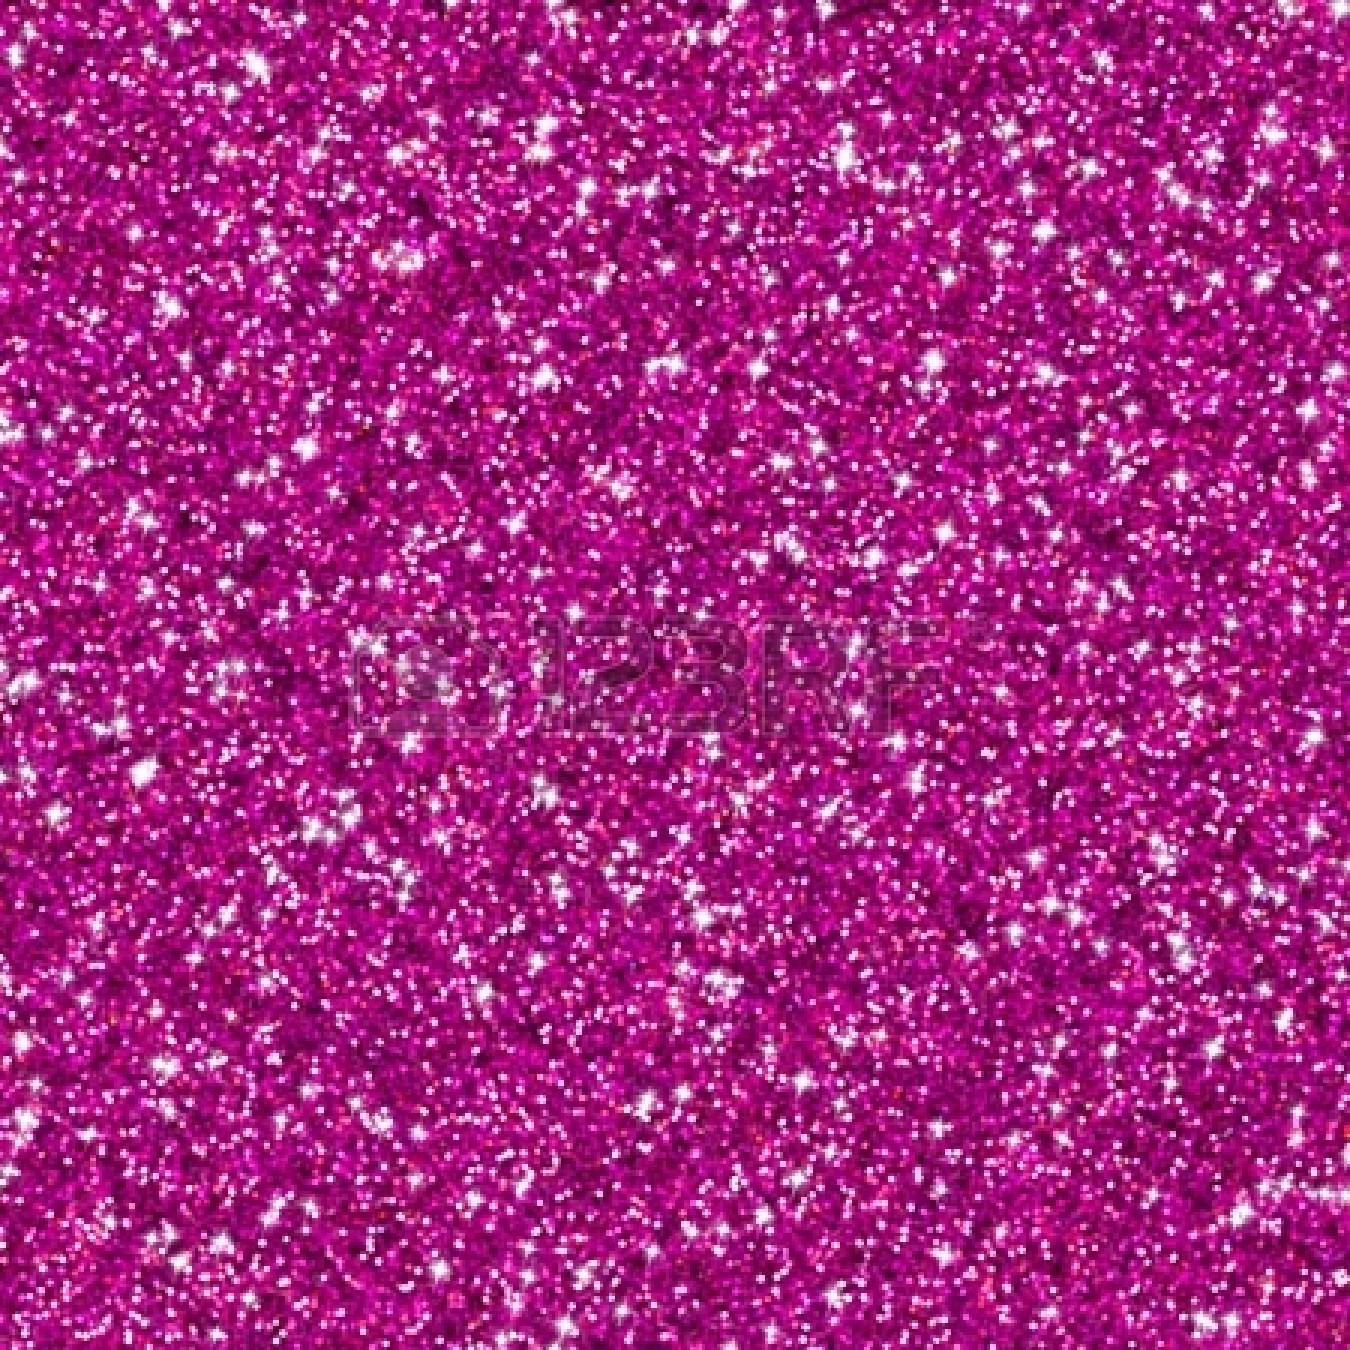 Pink Sparkly Backgrounds HD Wallpapers on picsfaircom